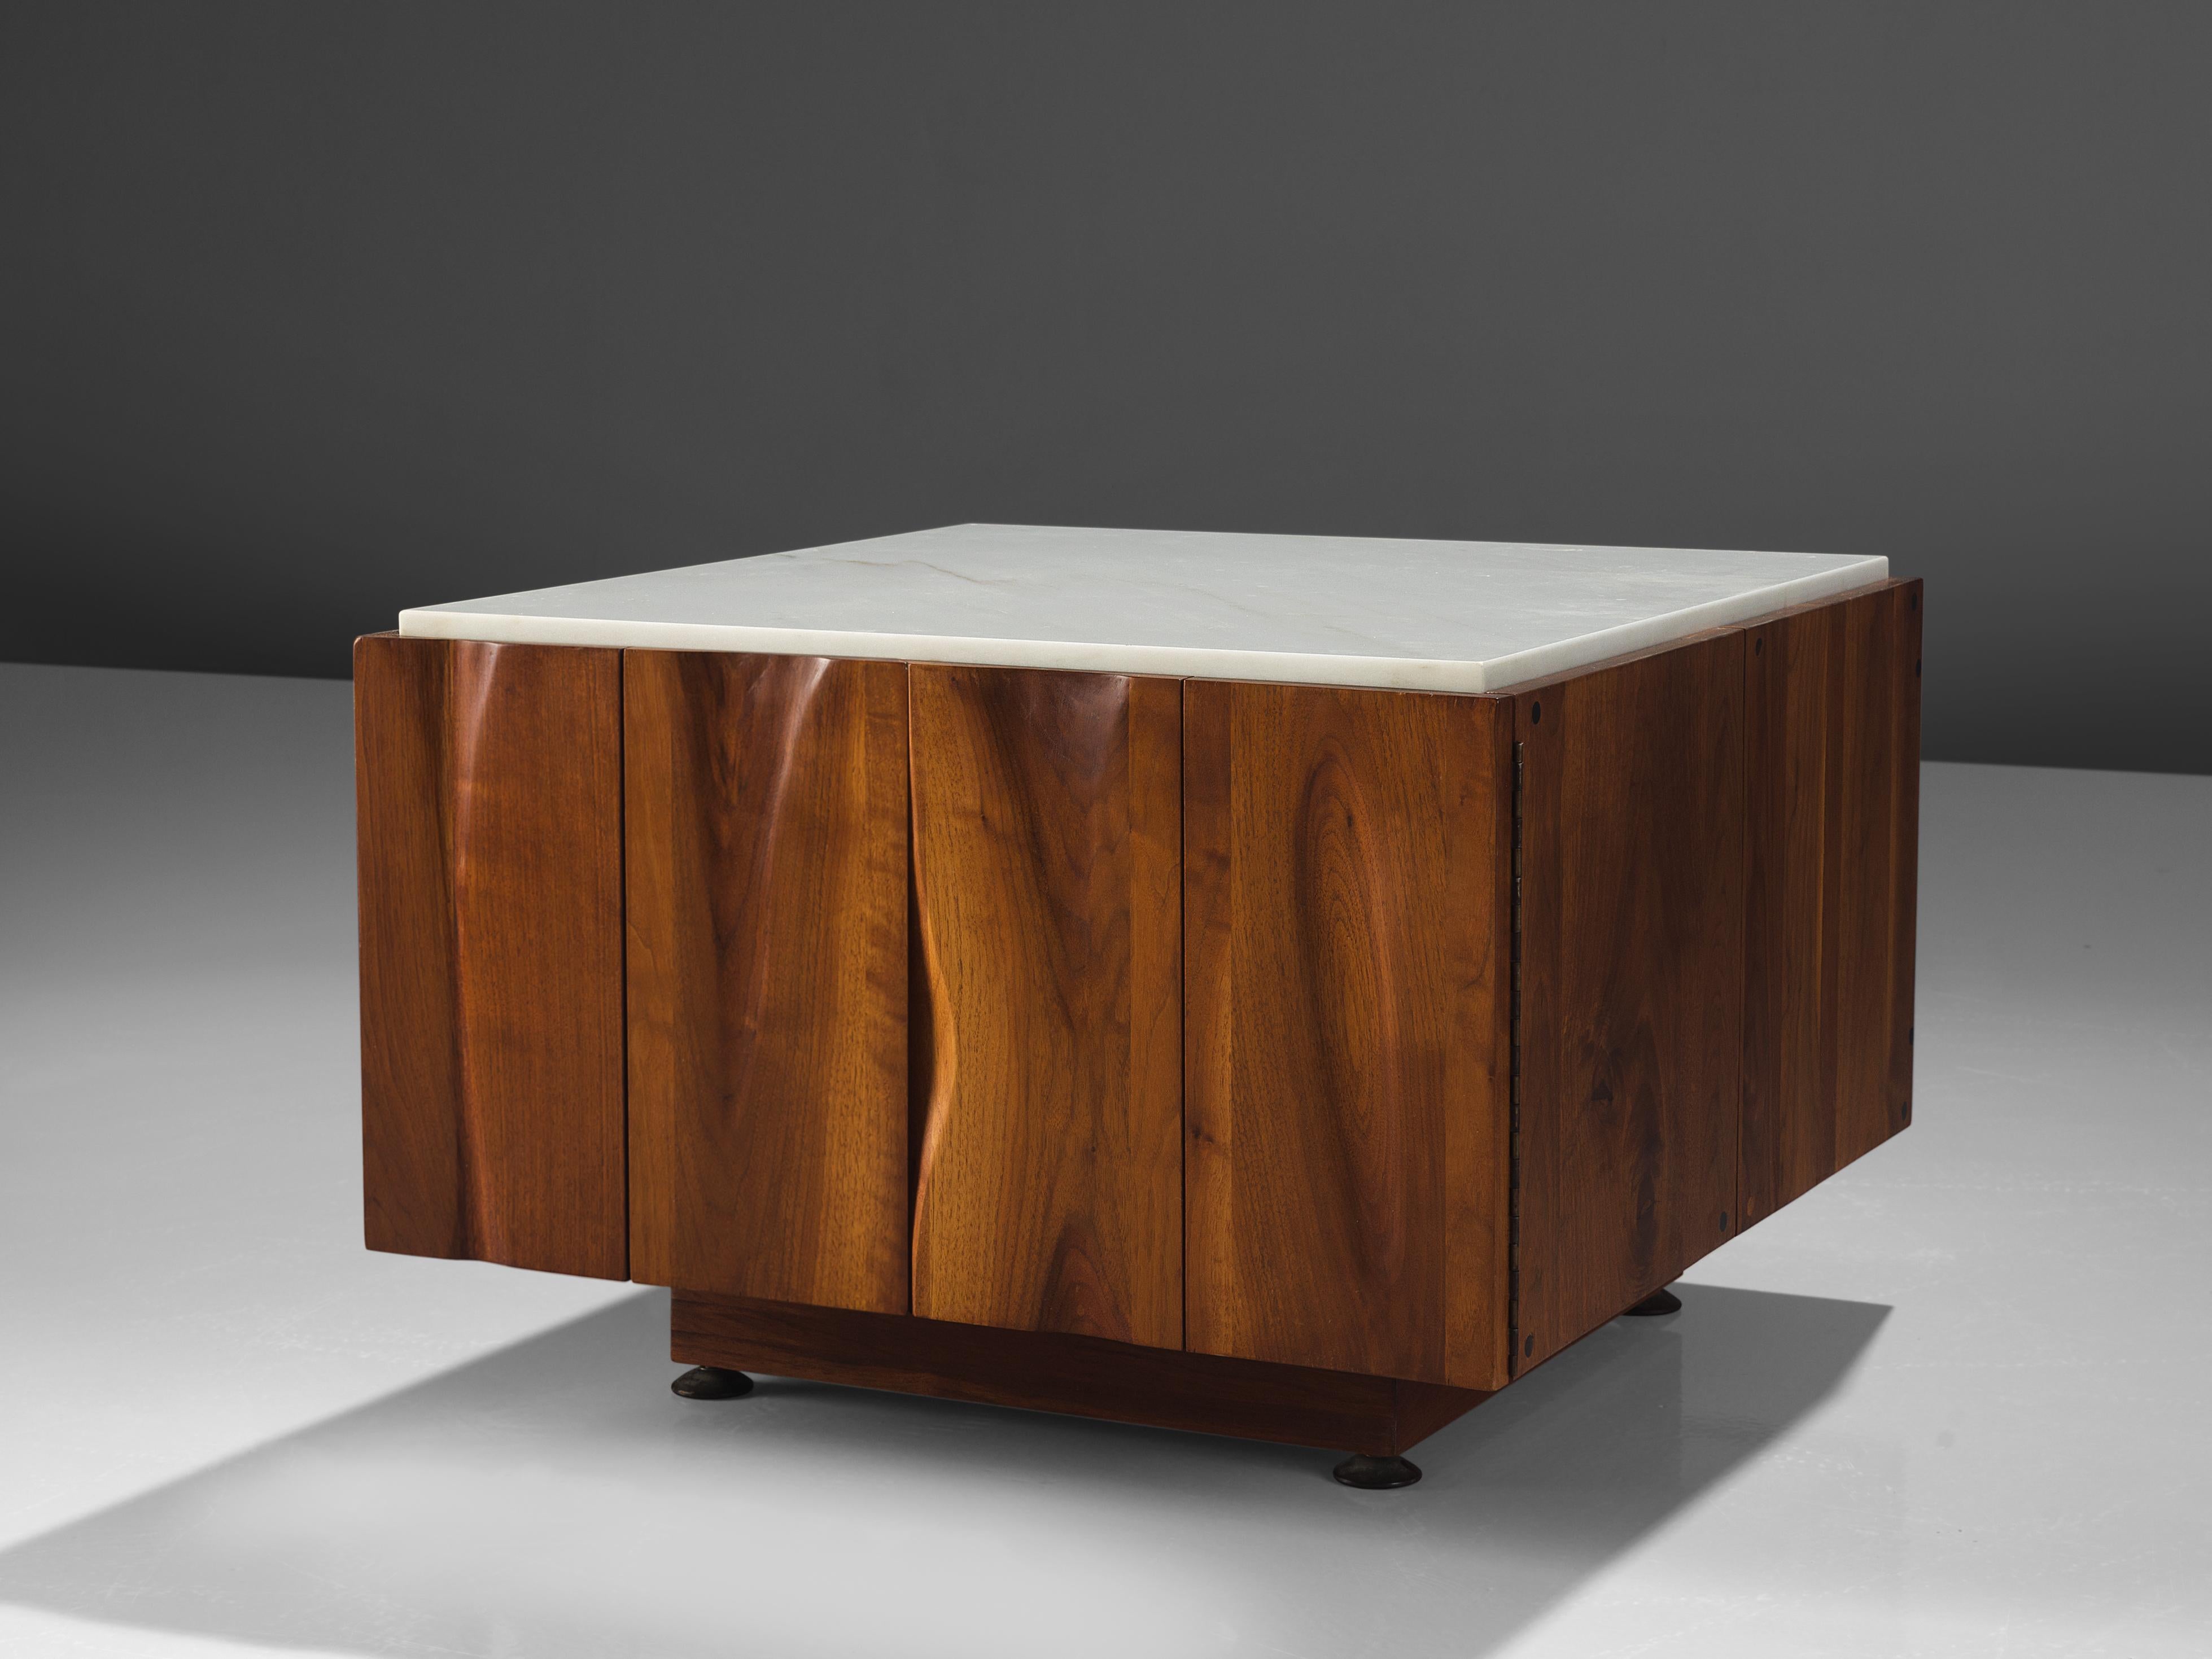 Phillip Lloyd Powell, coffee table with storage space, walnut, marble, New Hope, PA, United States, 1962

This exquisite coffee table is designed by Phillip Lloyd Powell and executed in solid walnut. The wooden surface not only shows stunning